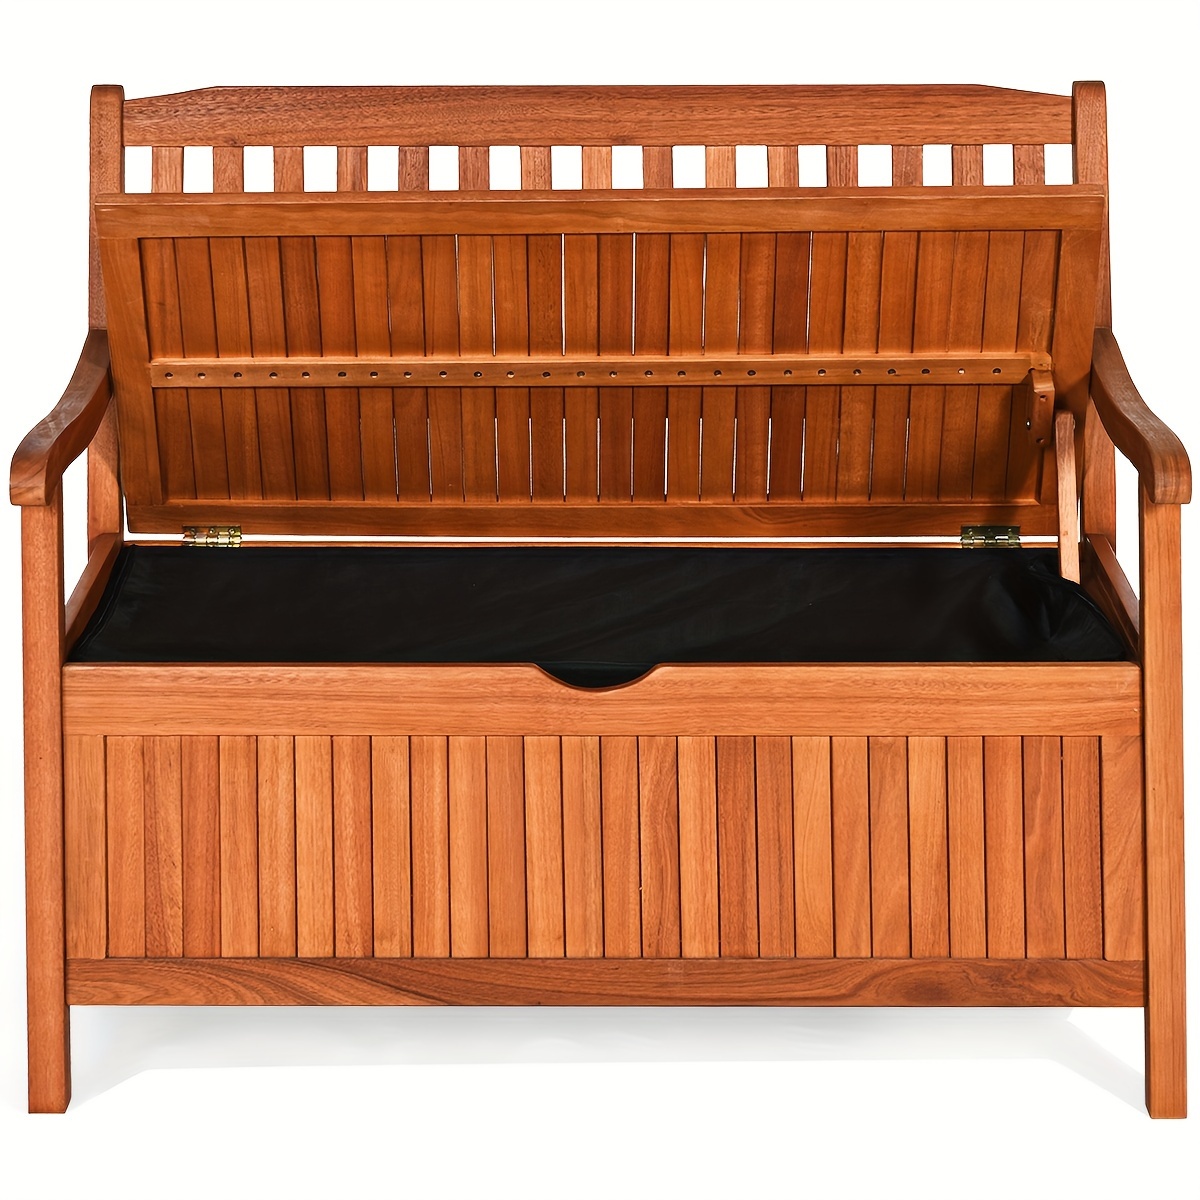 

42" Storage Bench Deck Box Solid Wood Seating Container Tools Toys W/backrest